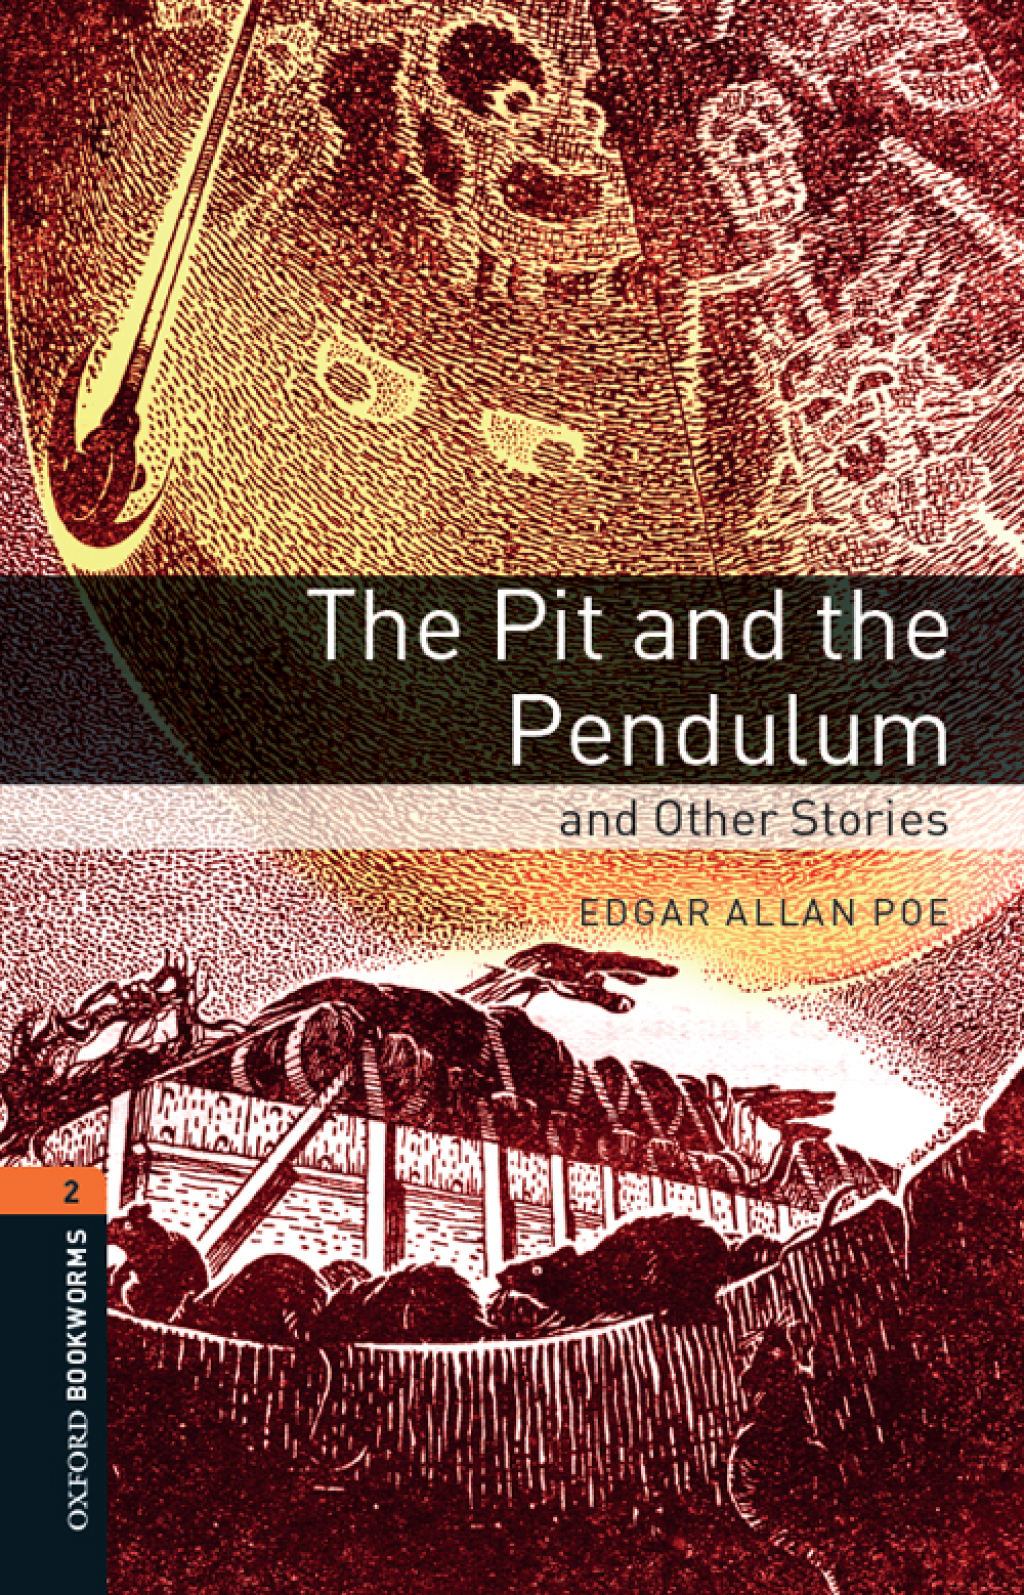 Pit and the Pendulum and Other Stories Level 2 Oxford Bookworms Library - 3rd Edition (eBook Rental)